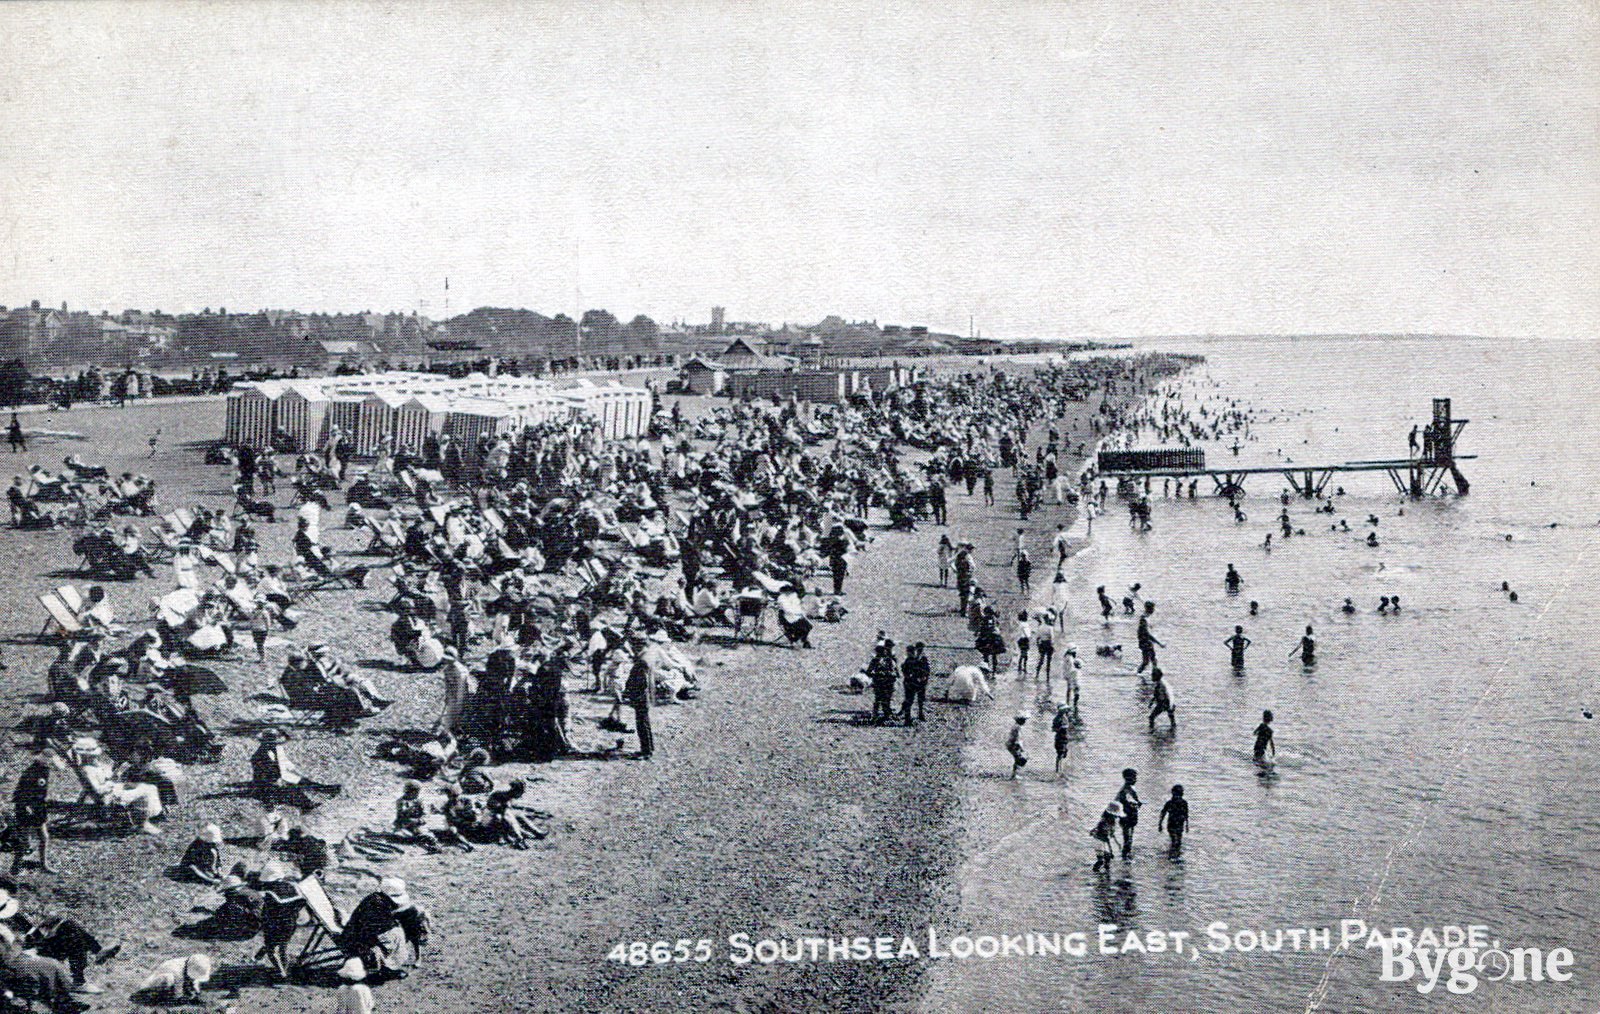 Southsea looking East, South Parade